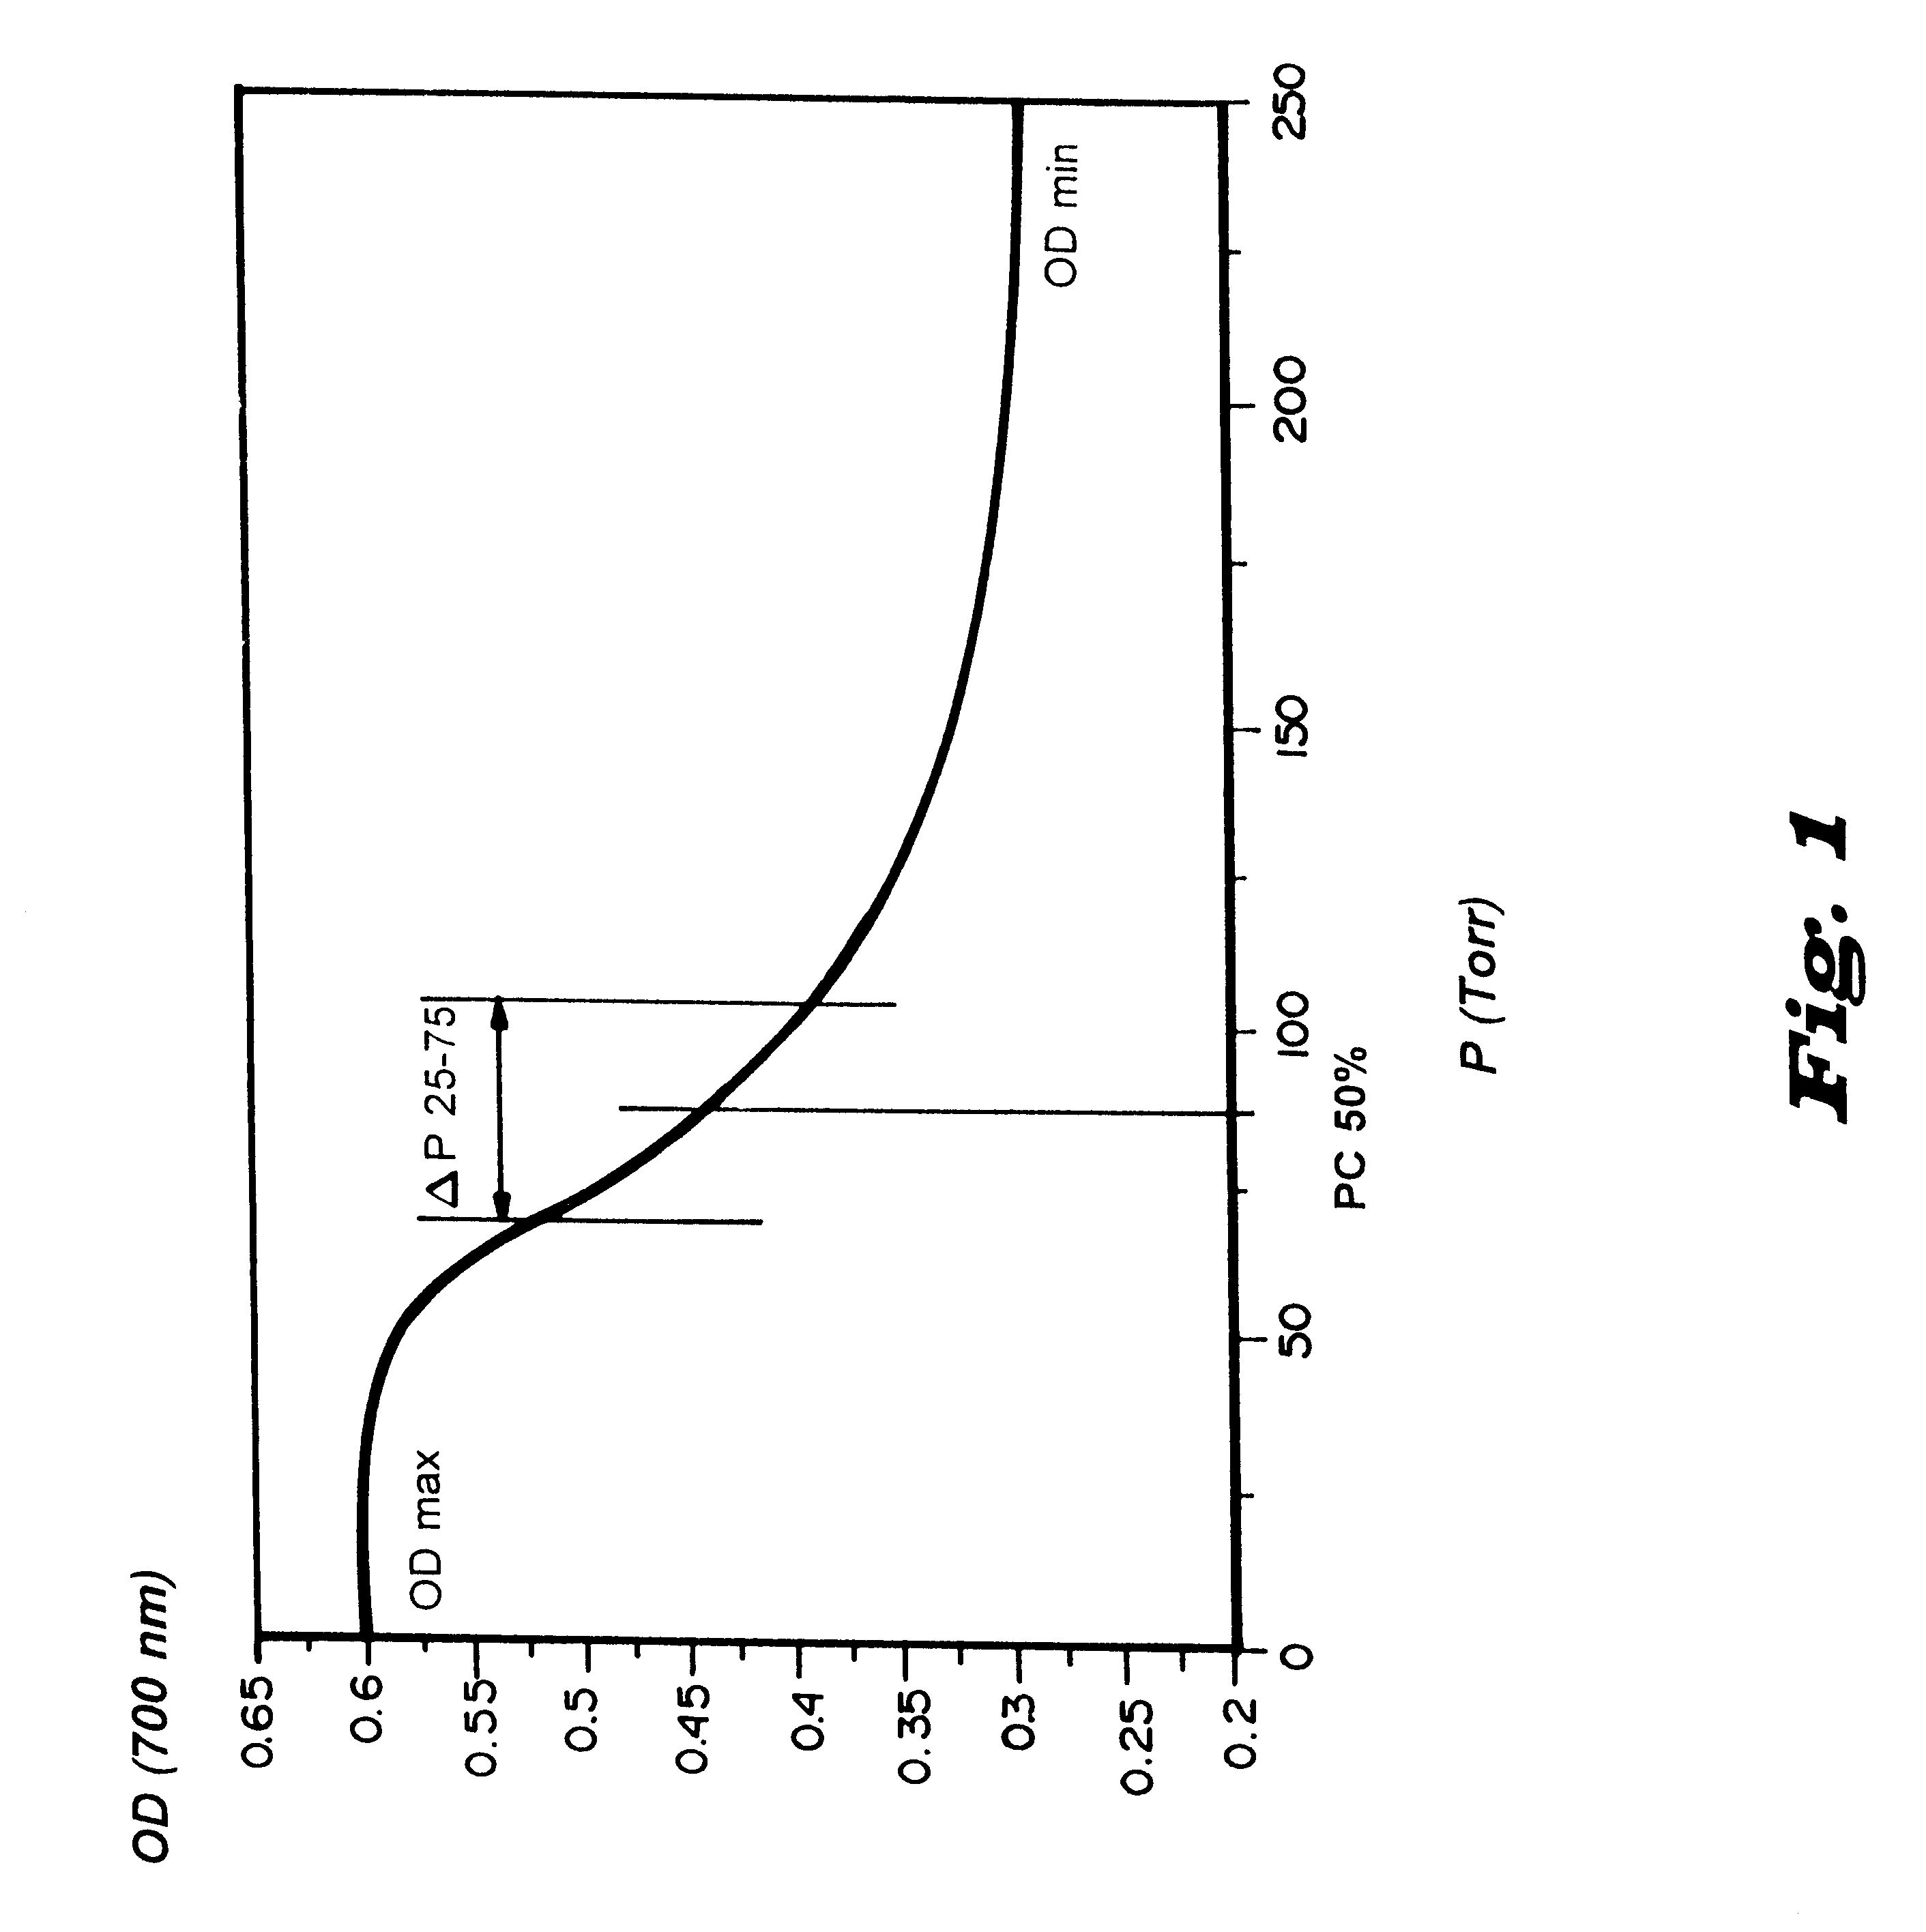 Long-lasting aqueous dispersions or suspensions of pressure-resistant gas-filled microvesicles and methods for the preparation thereof